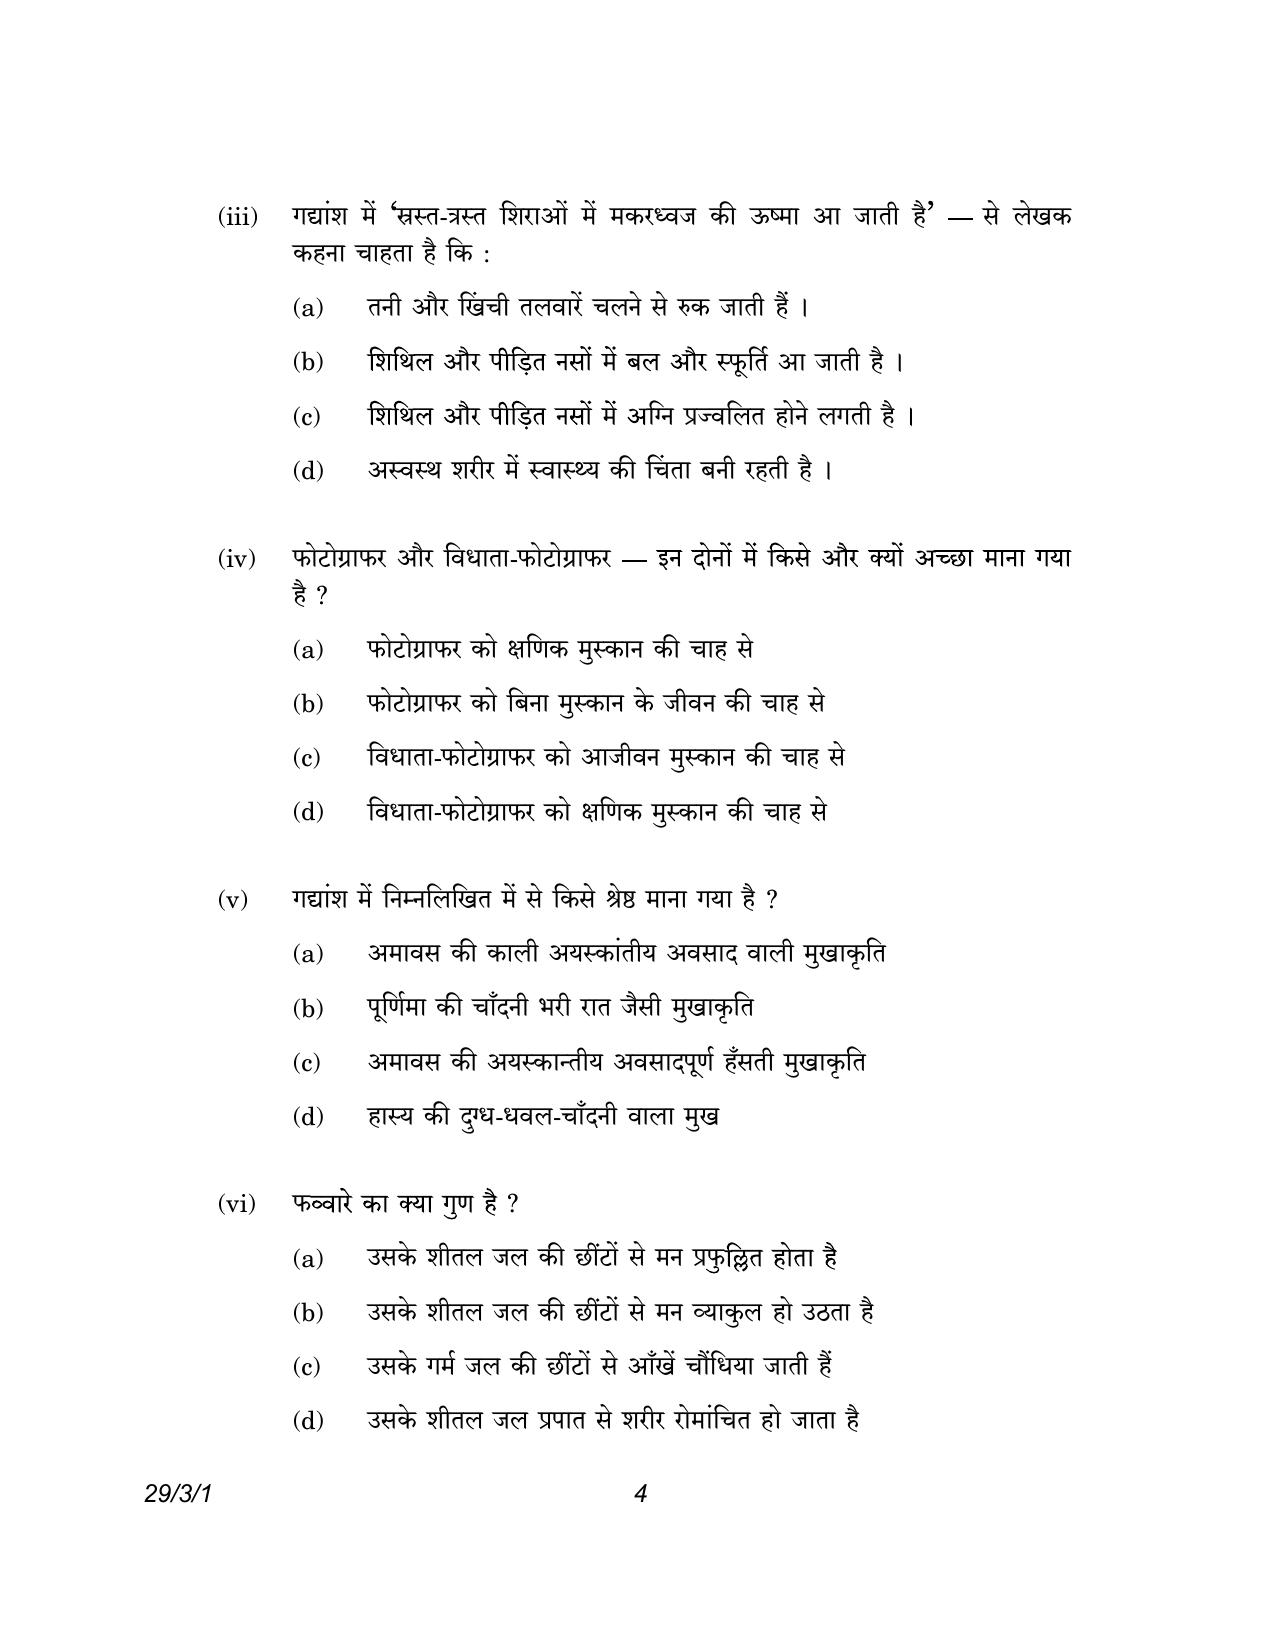 CBSE Class 12 29-3-1 Hindi Elective 2023 Question Paper - Page 4